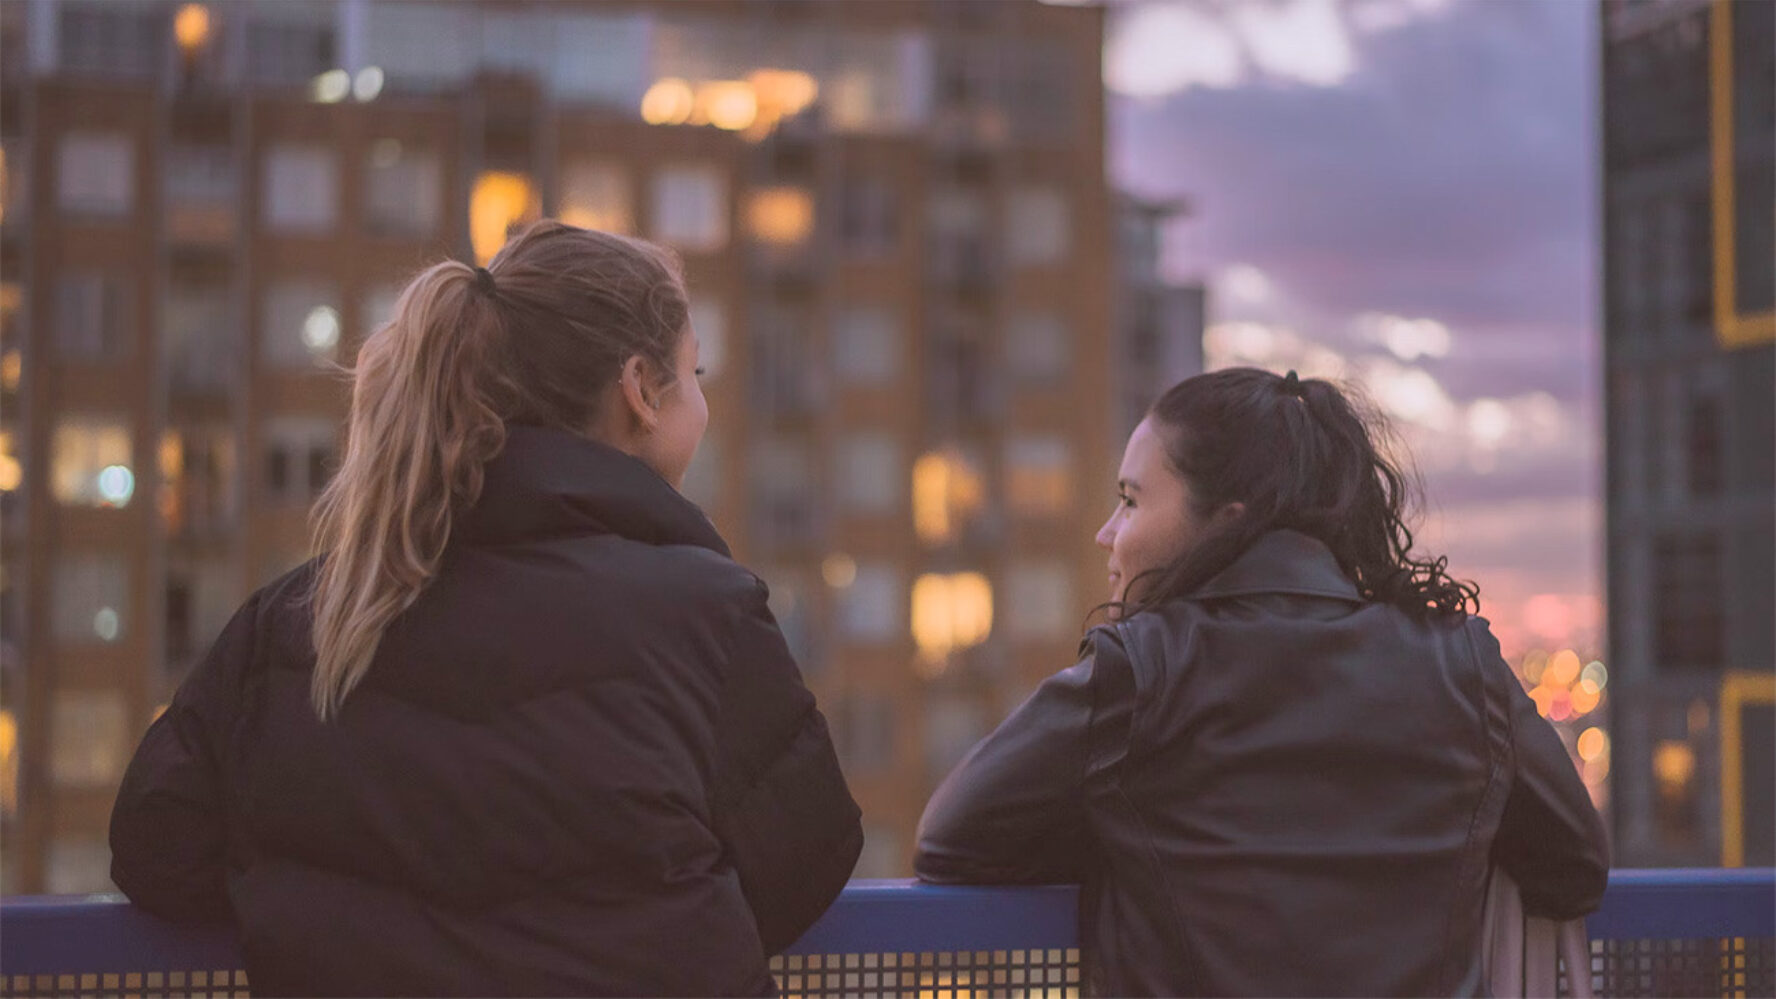 Two young women facing away and looking out over a city at dusk